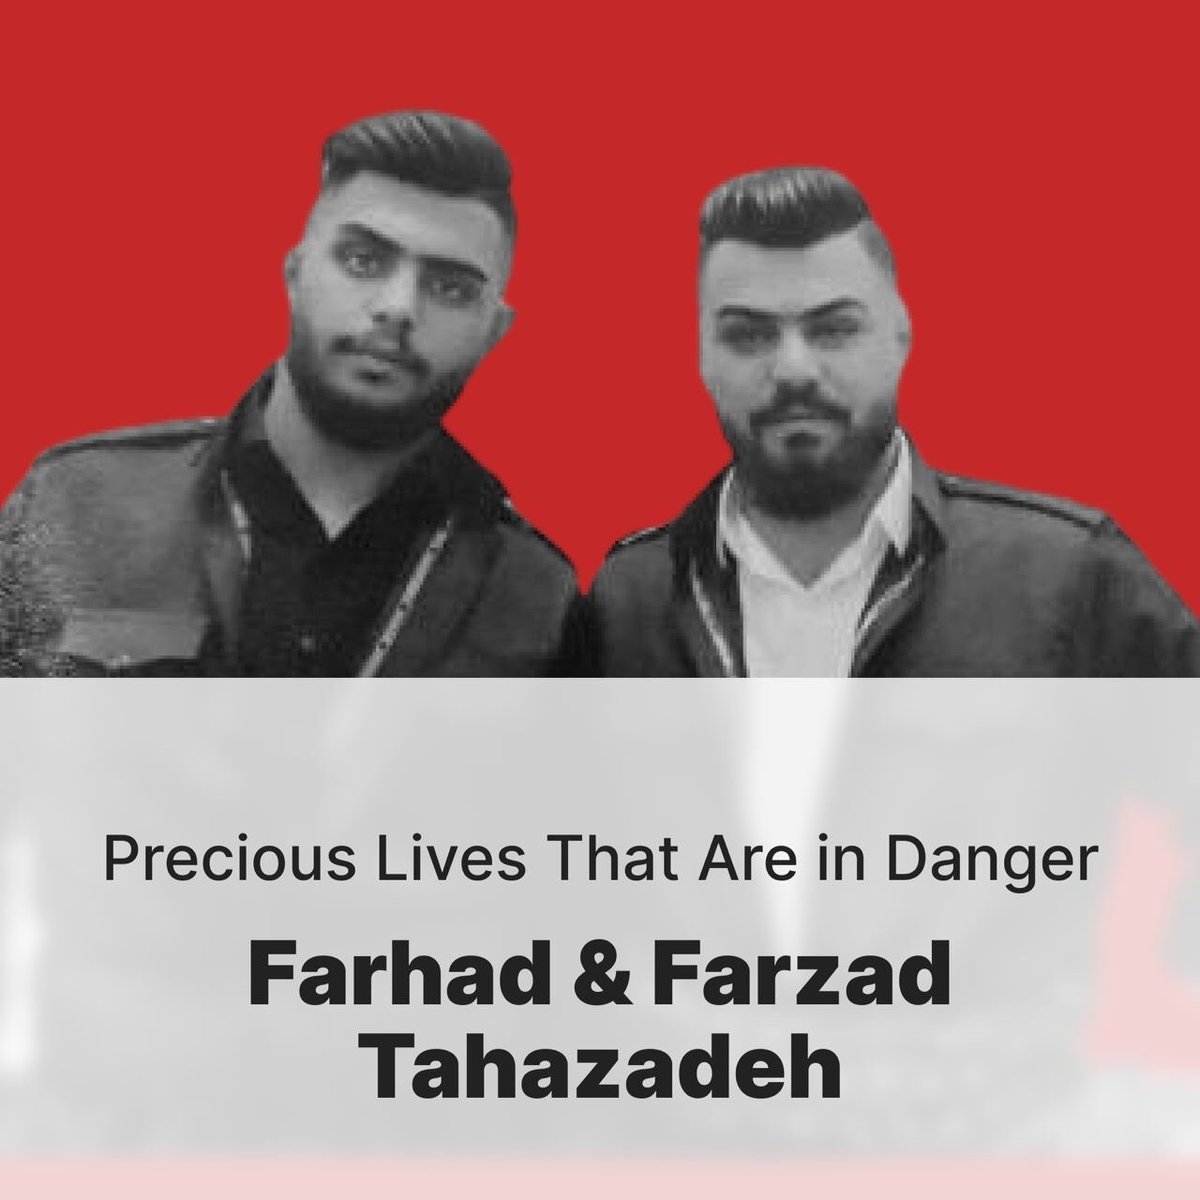 Be the voice of two young Innocent Iranian. #FarhadTahaZadeh and #FarzadTahaZadeh are two 26 and 25 years old brothers who have been sentenced to death.
SAY THEIR NAME!!
#IRGCterrorists

@JosepBorrellF
@USEnvoyIran
@dwnews
@CNN
 @AP
@UNHumanRights